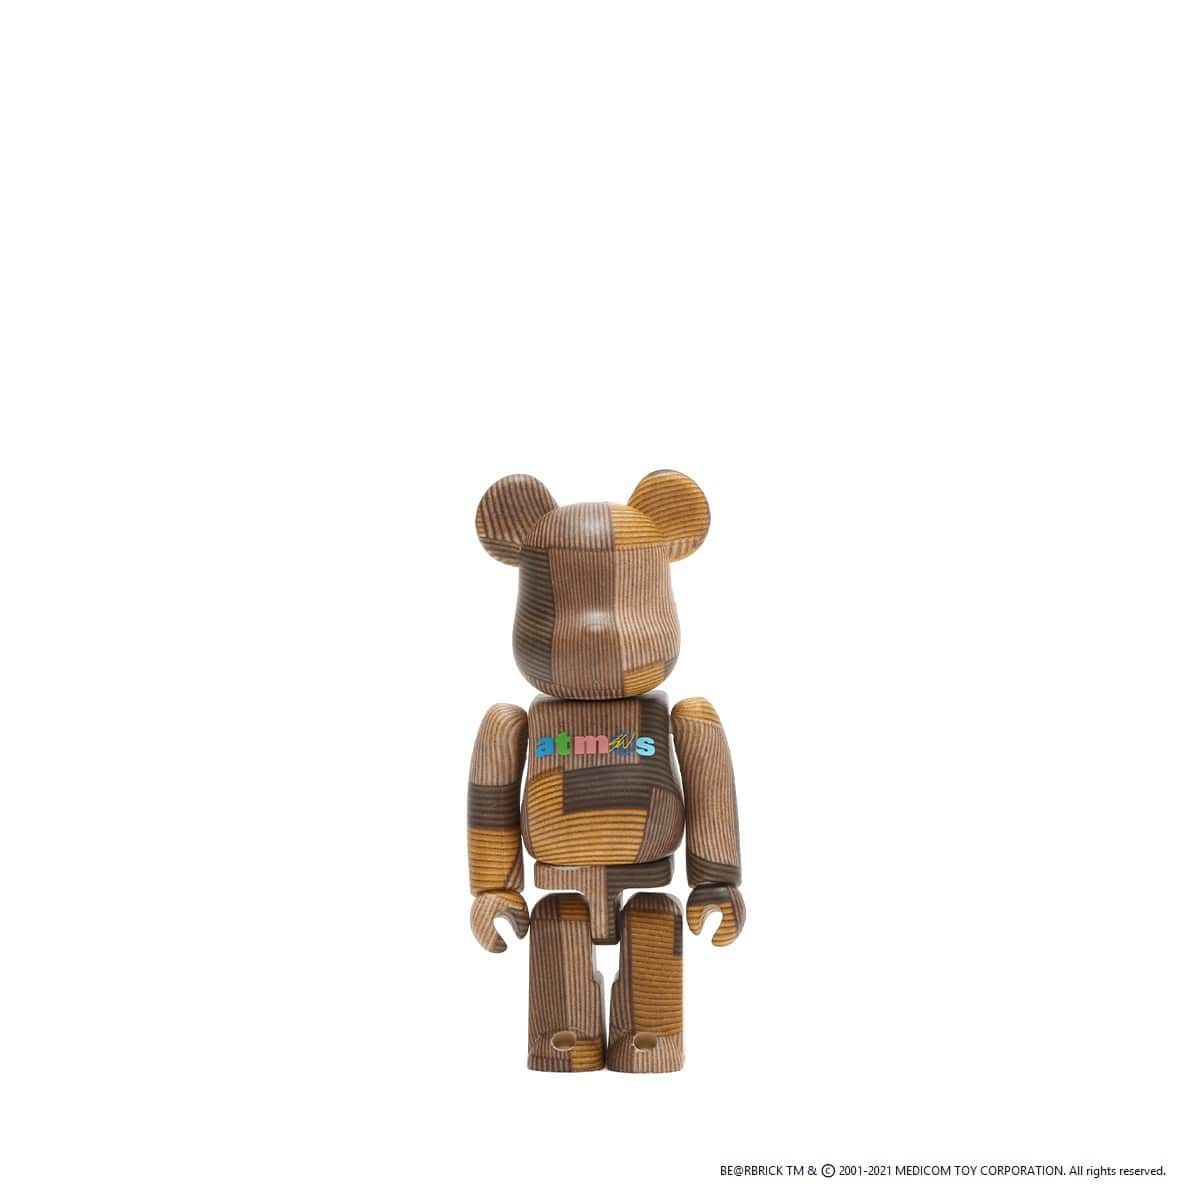 MEDICOM TOY BE@RBRICK atmos X Sean Wotherspoon 100% & 400% 21FA-S